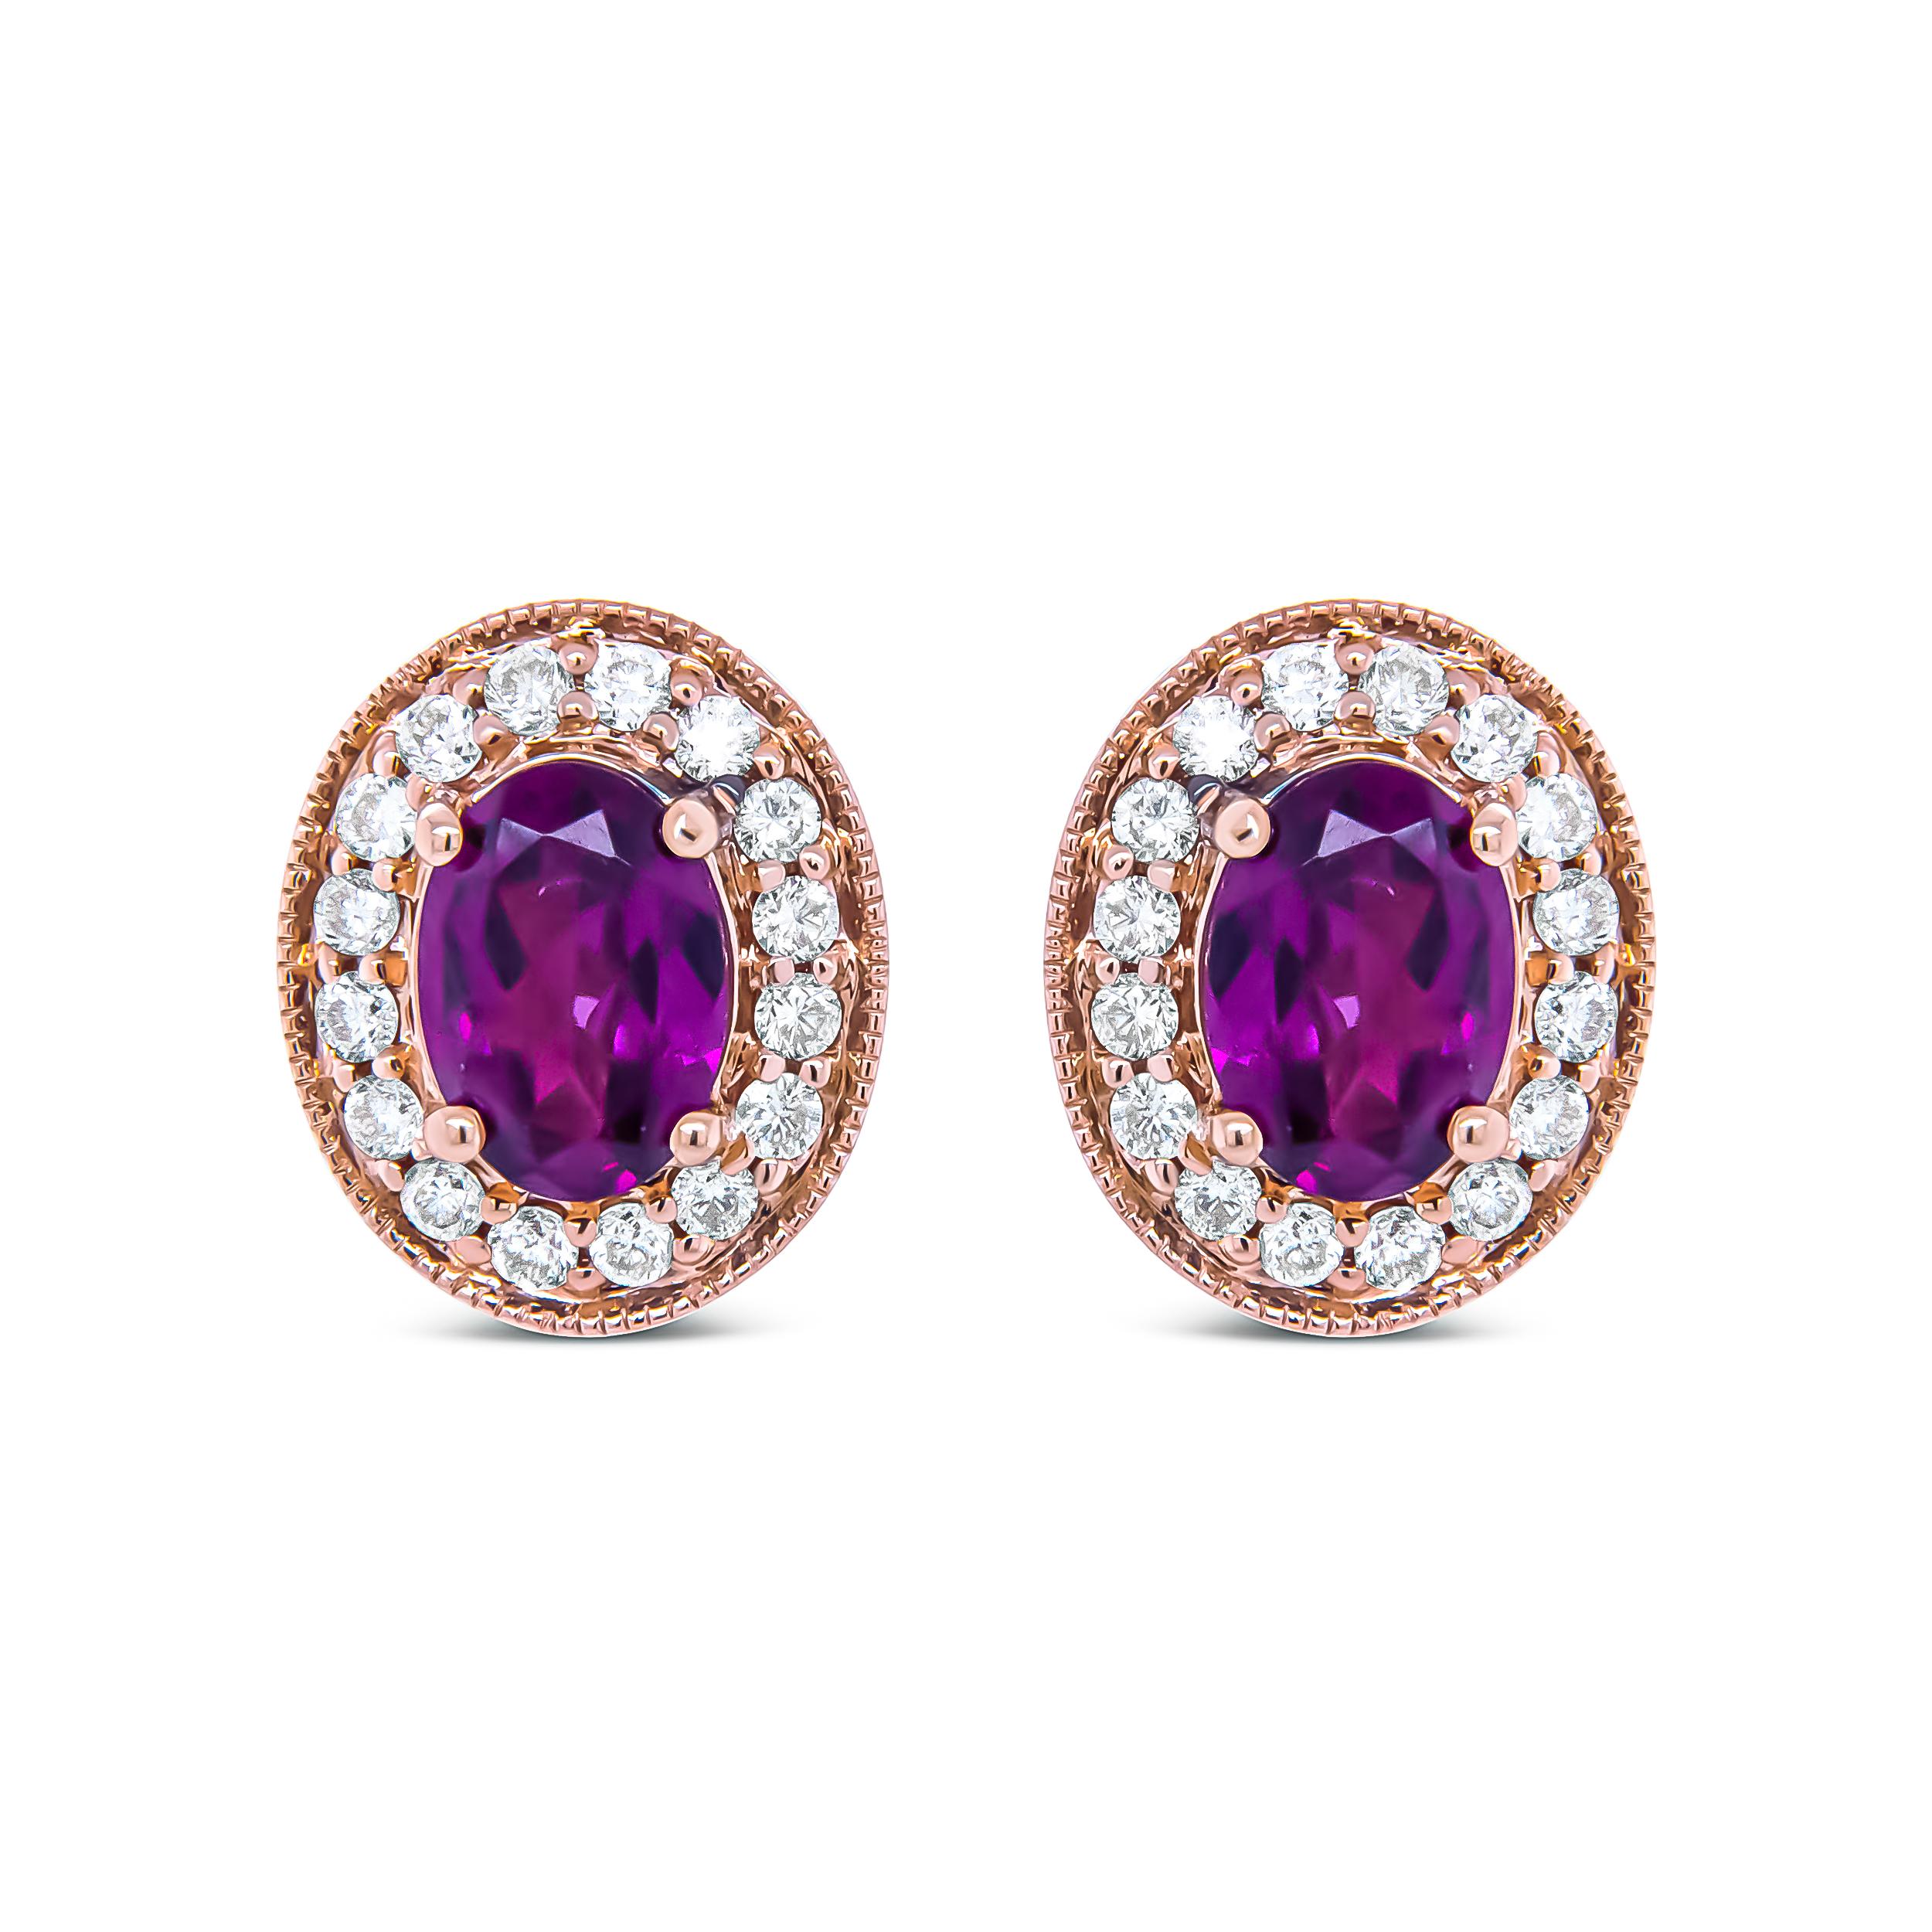 Glamorous and beguiling, these halo stud earrings are sure to please everyone's level of sparkle. Fashioned in genuine 14k rose gold, the earrings feature 7x5mm oval garnets in prong settings. A halo of round, prong-set diamonds surround each